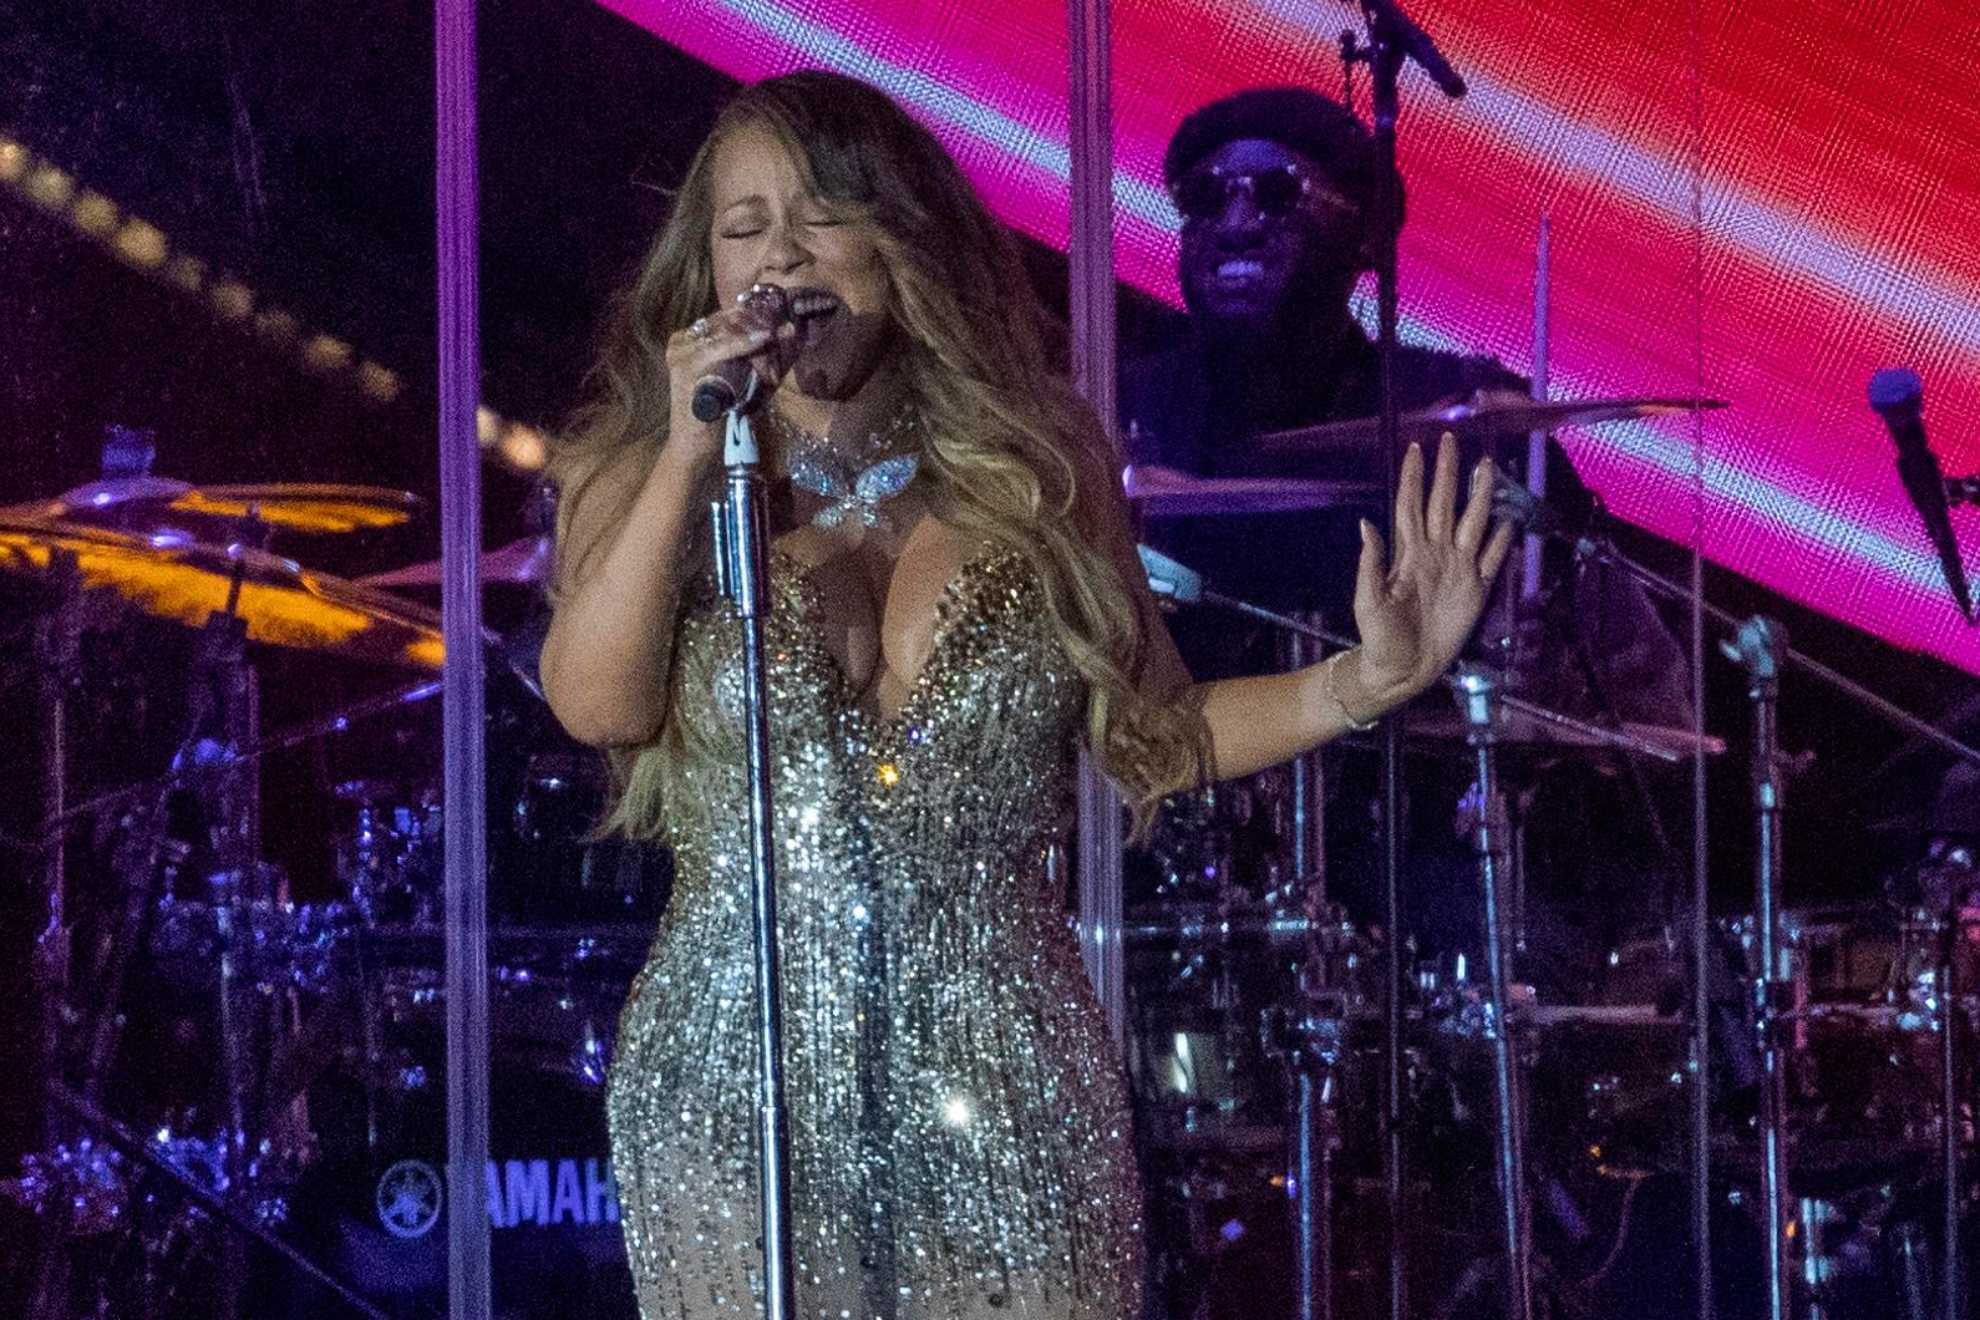 Mariah Carey and her song All I Want for Christmas tops the Billboard Hot 100 for 14th week